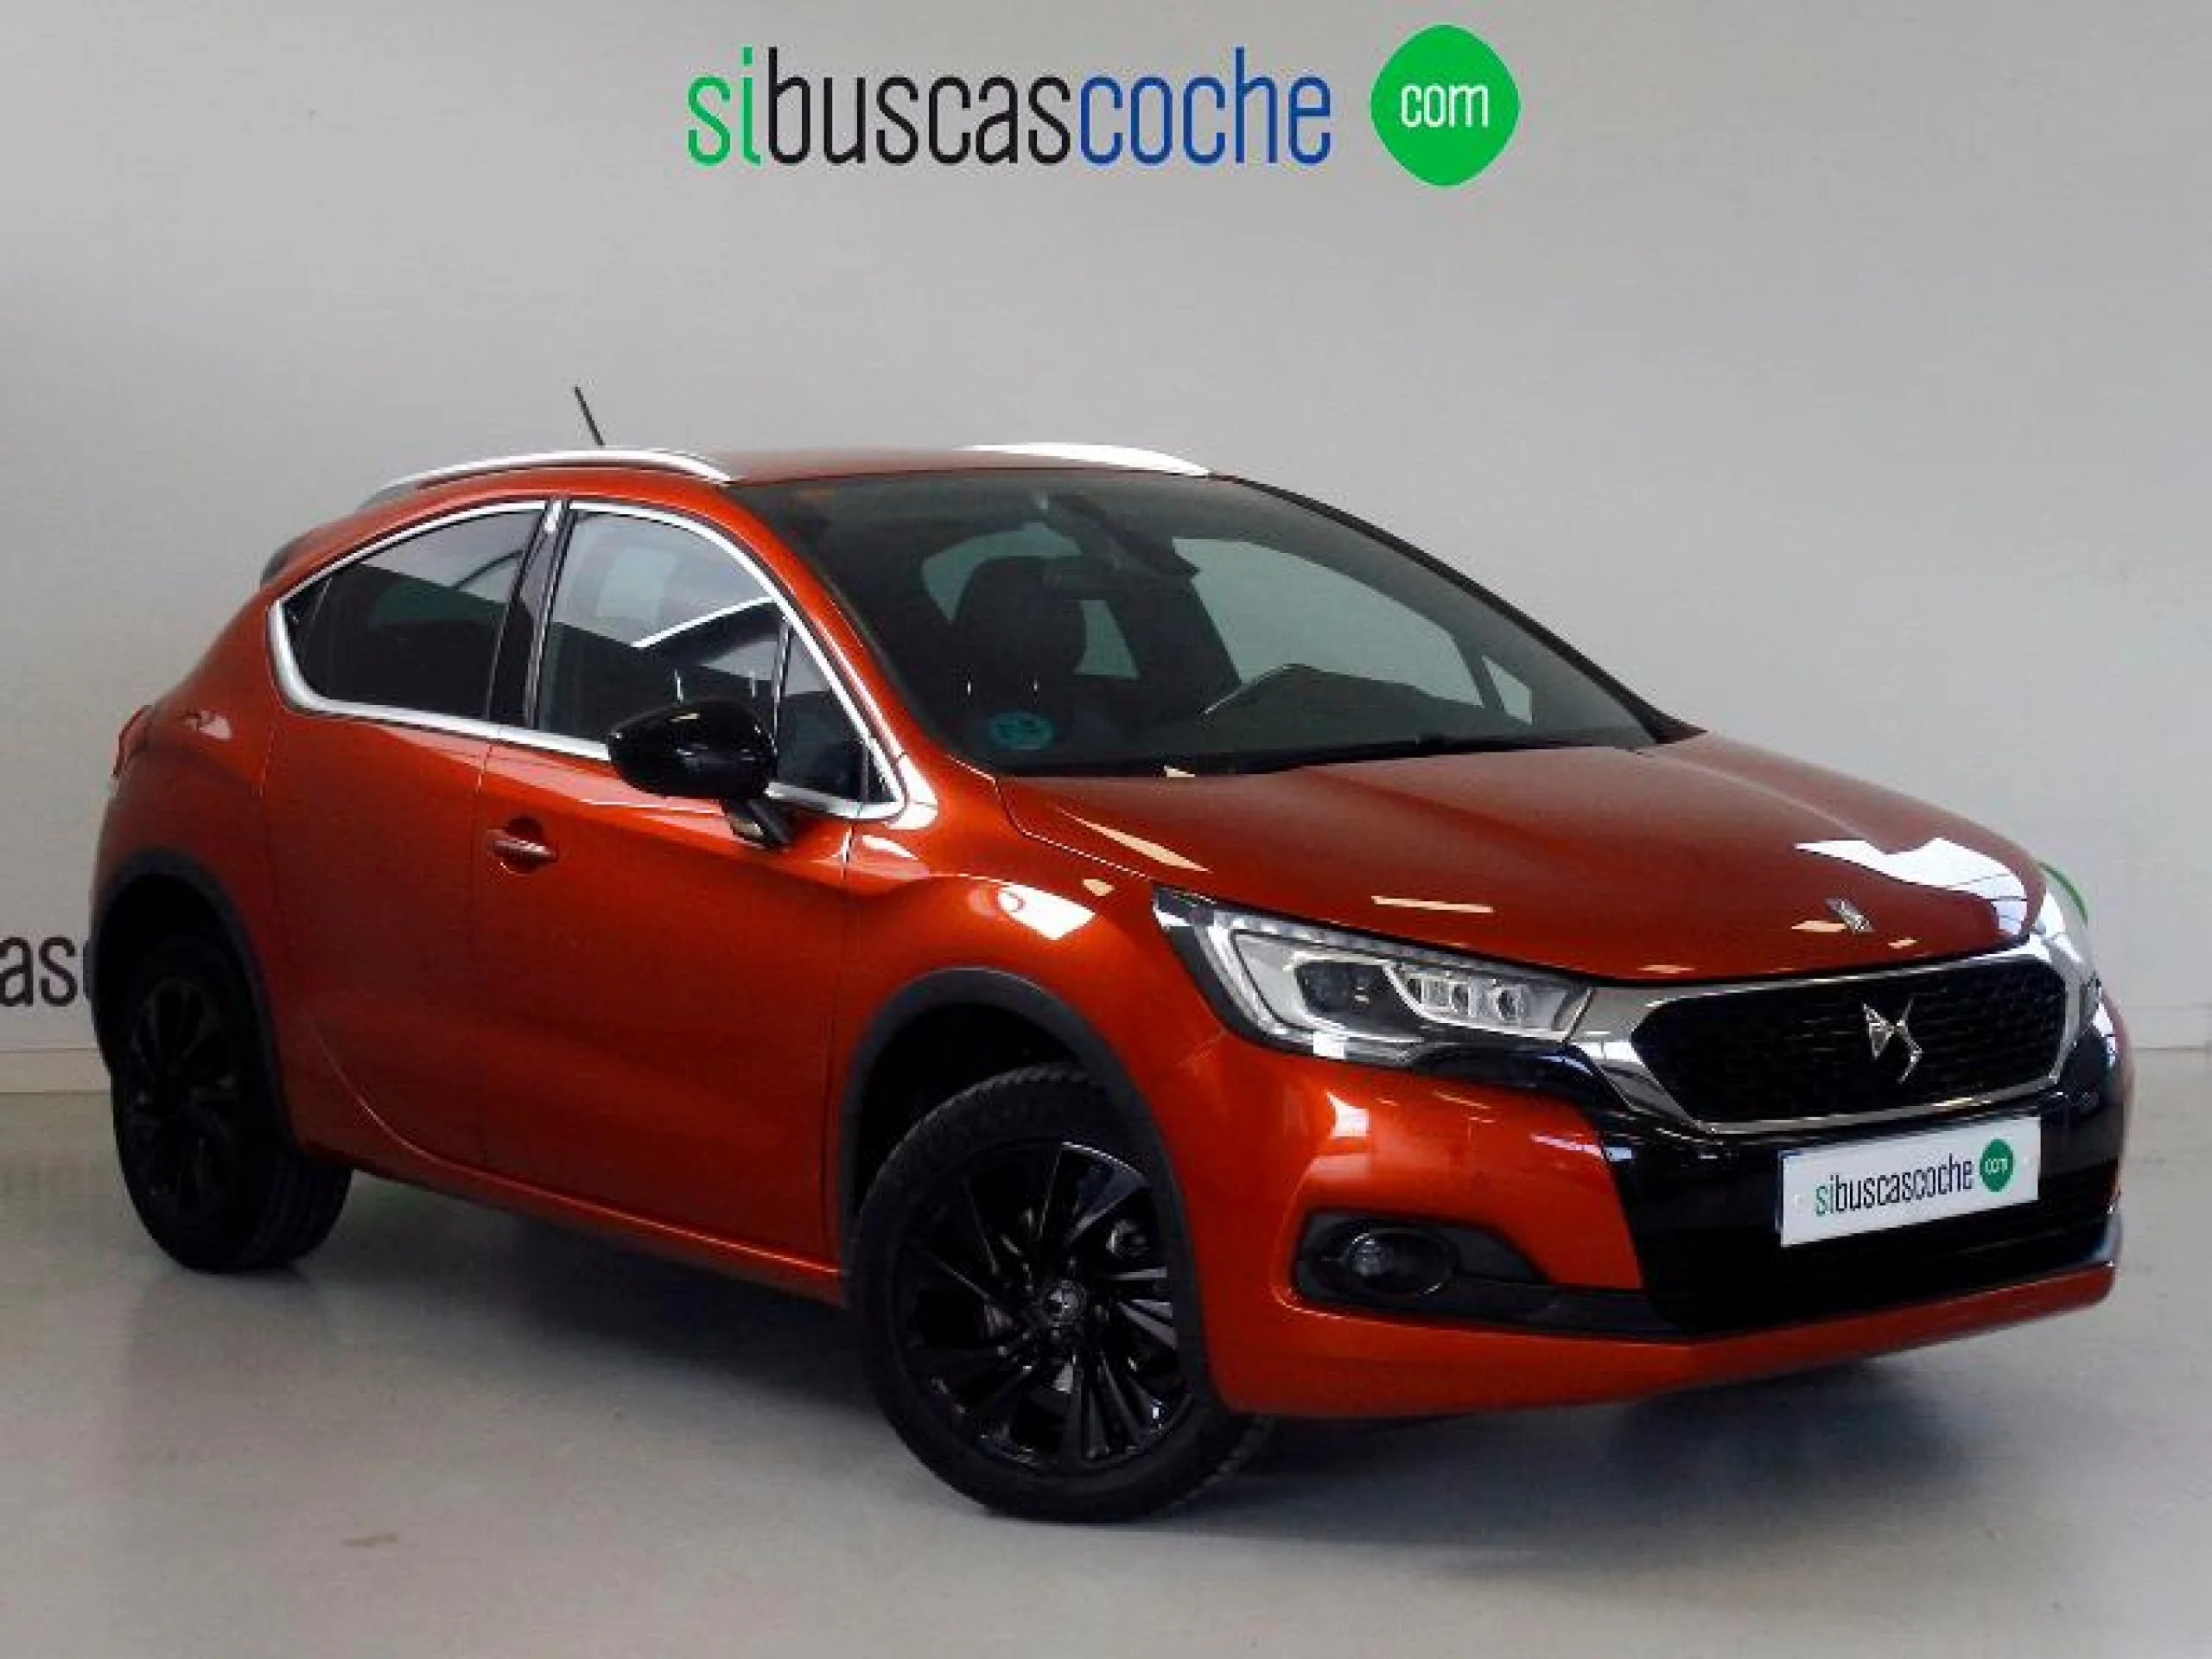 DS Ds 4 crossback 1.6 BLUEHDI 88KW (120CV) STYLE - Foto 1